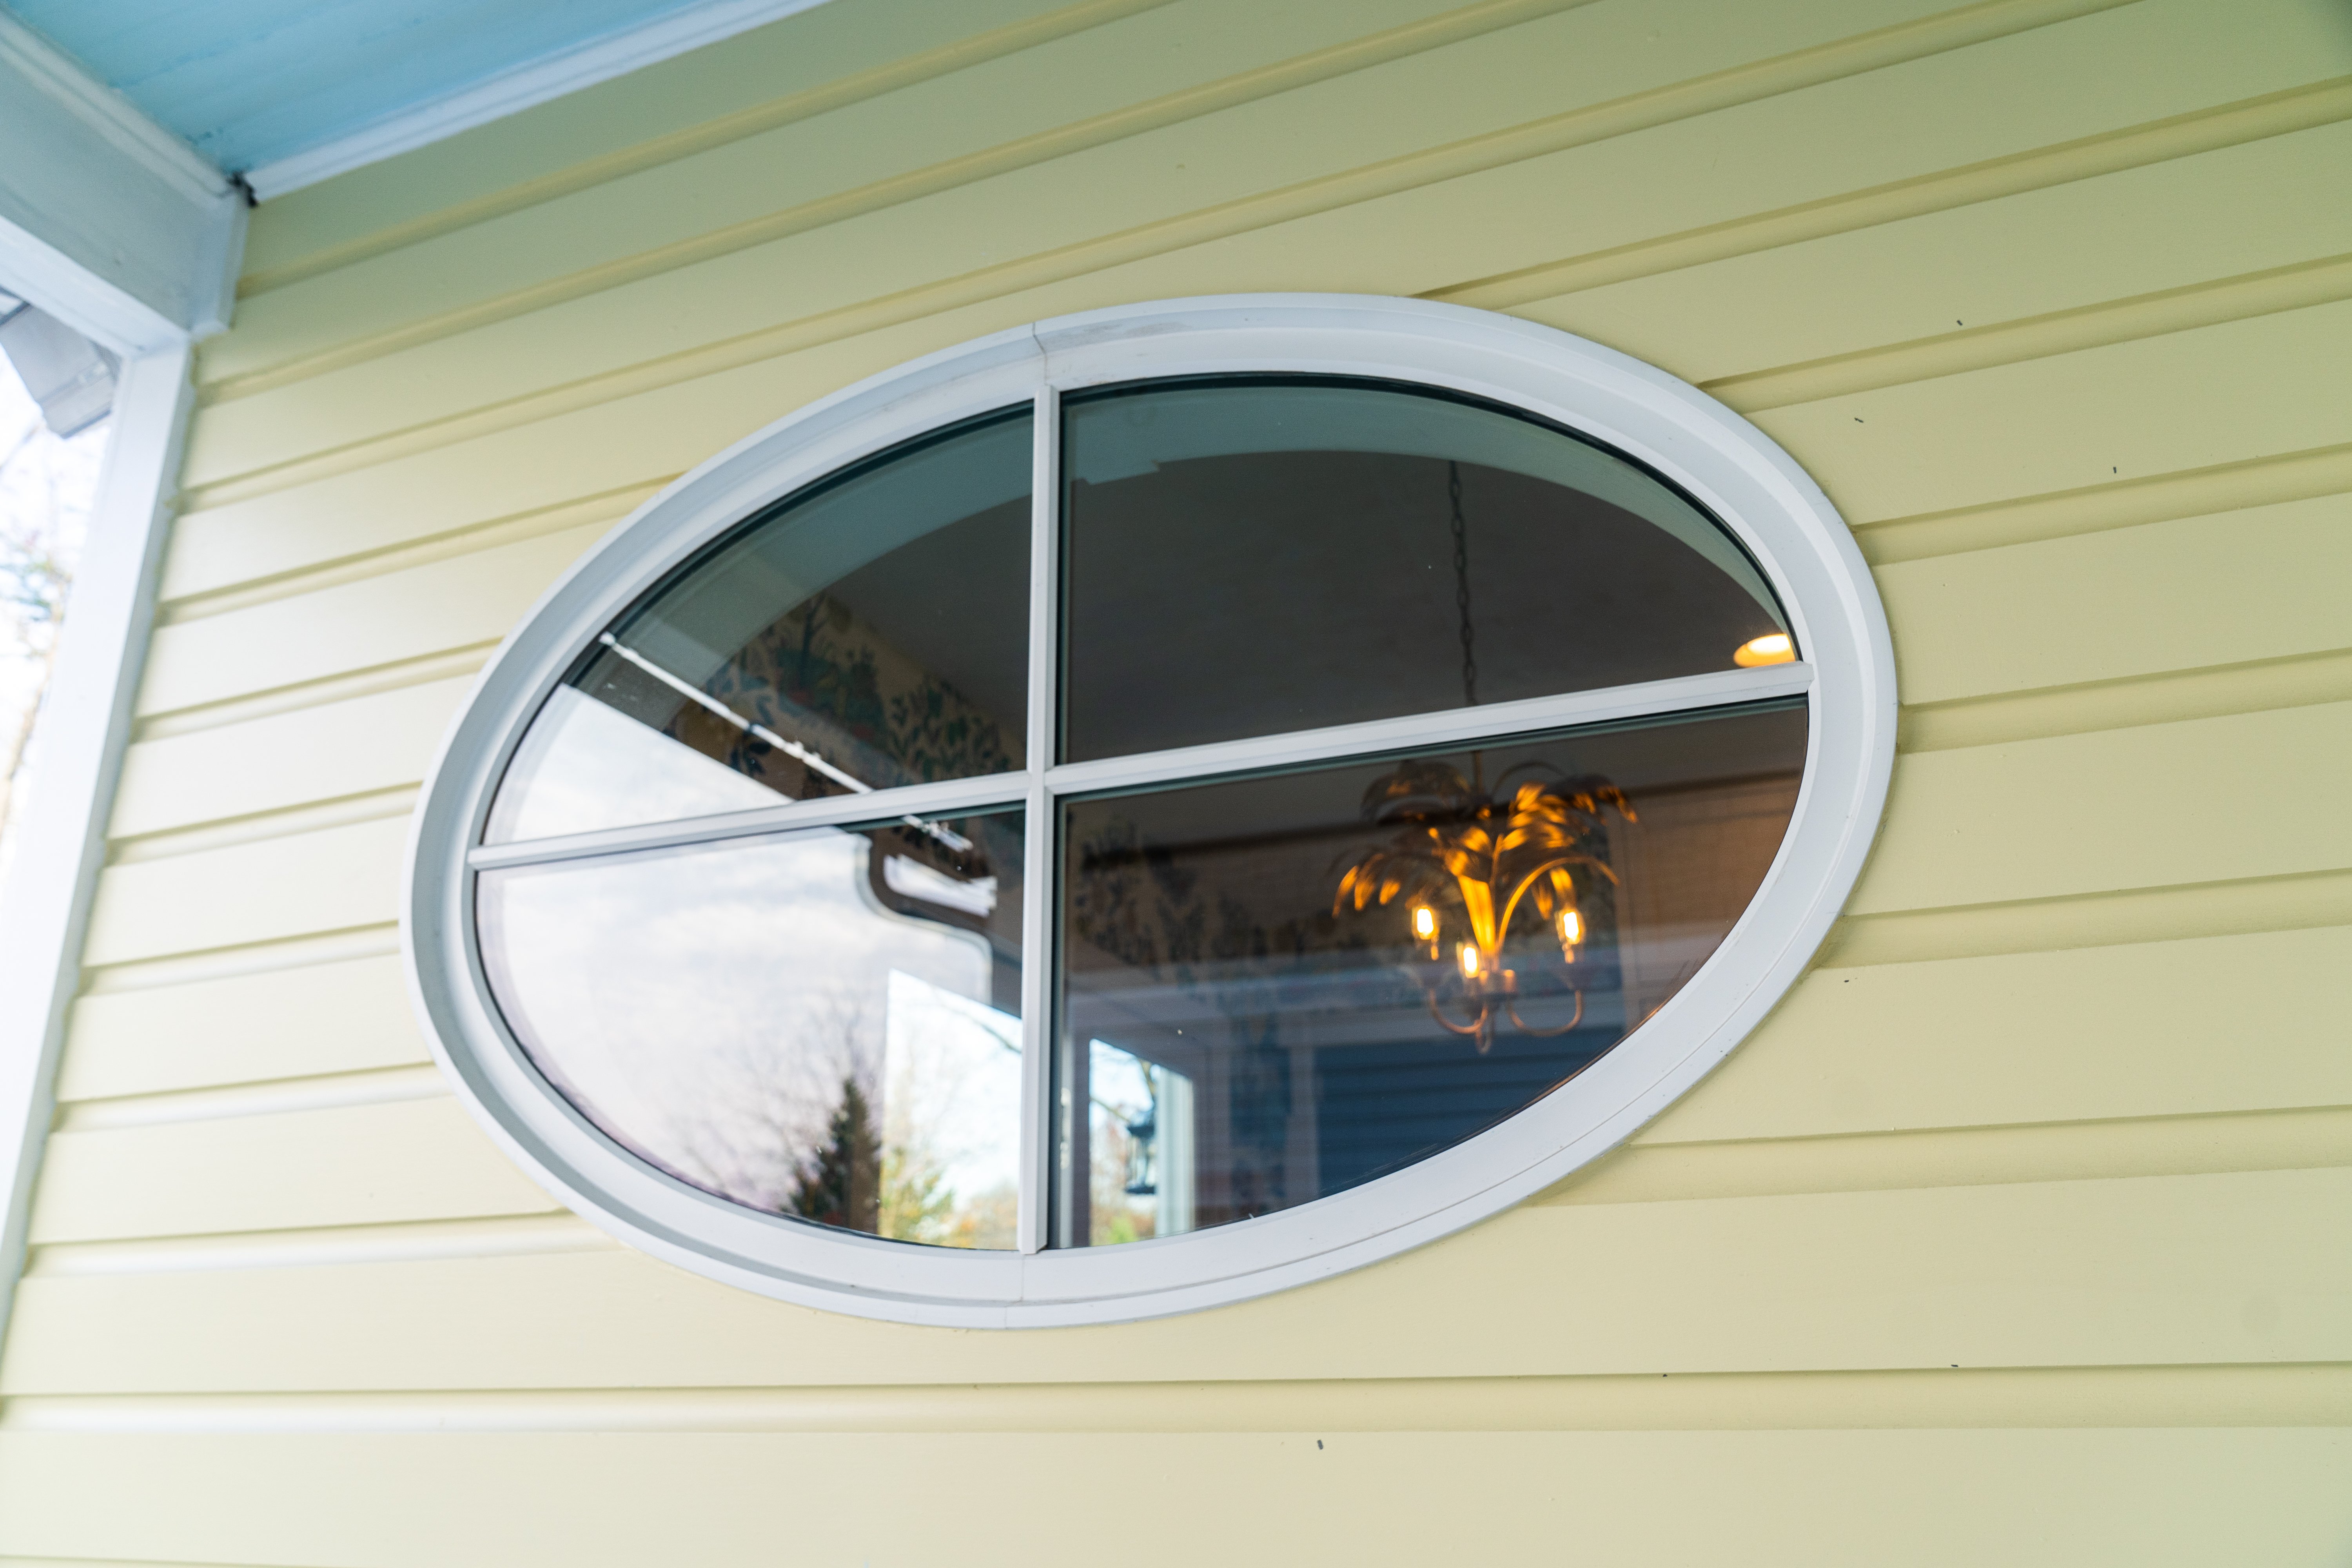 Oval window with panels